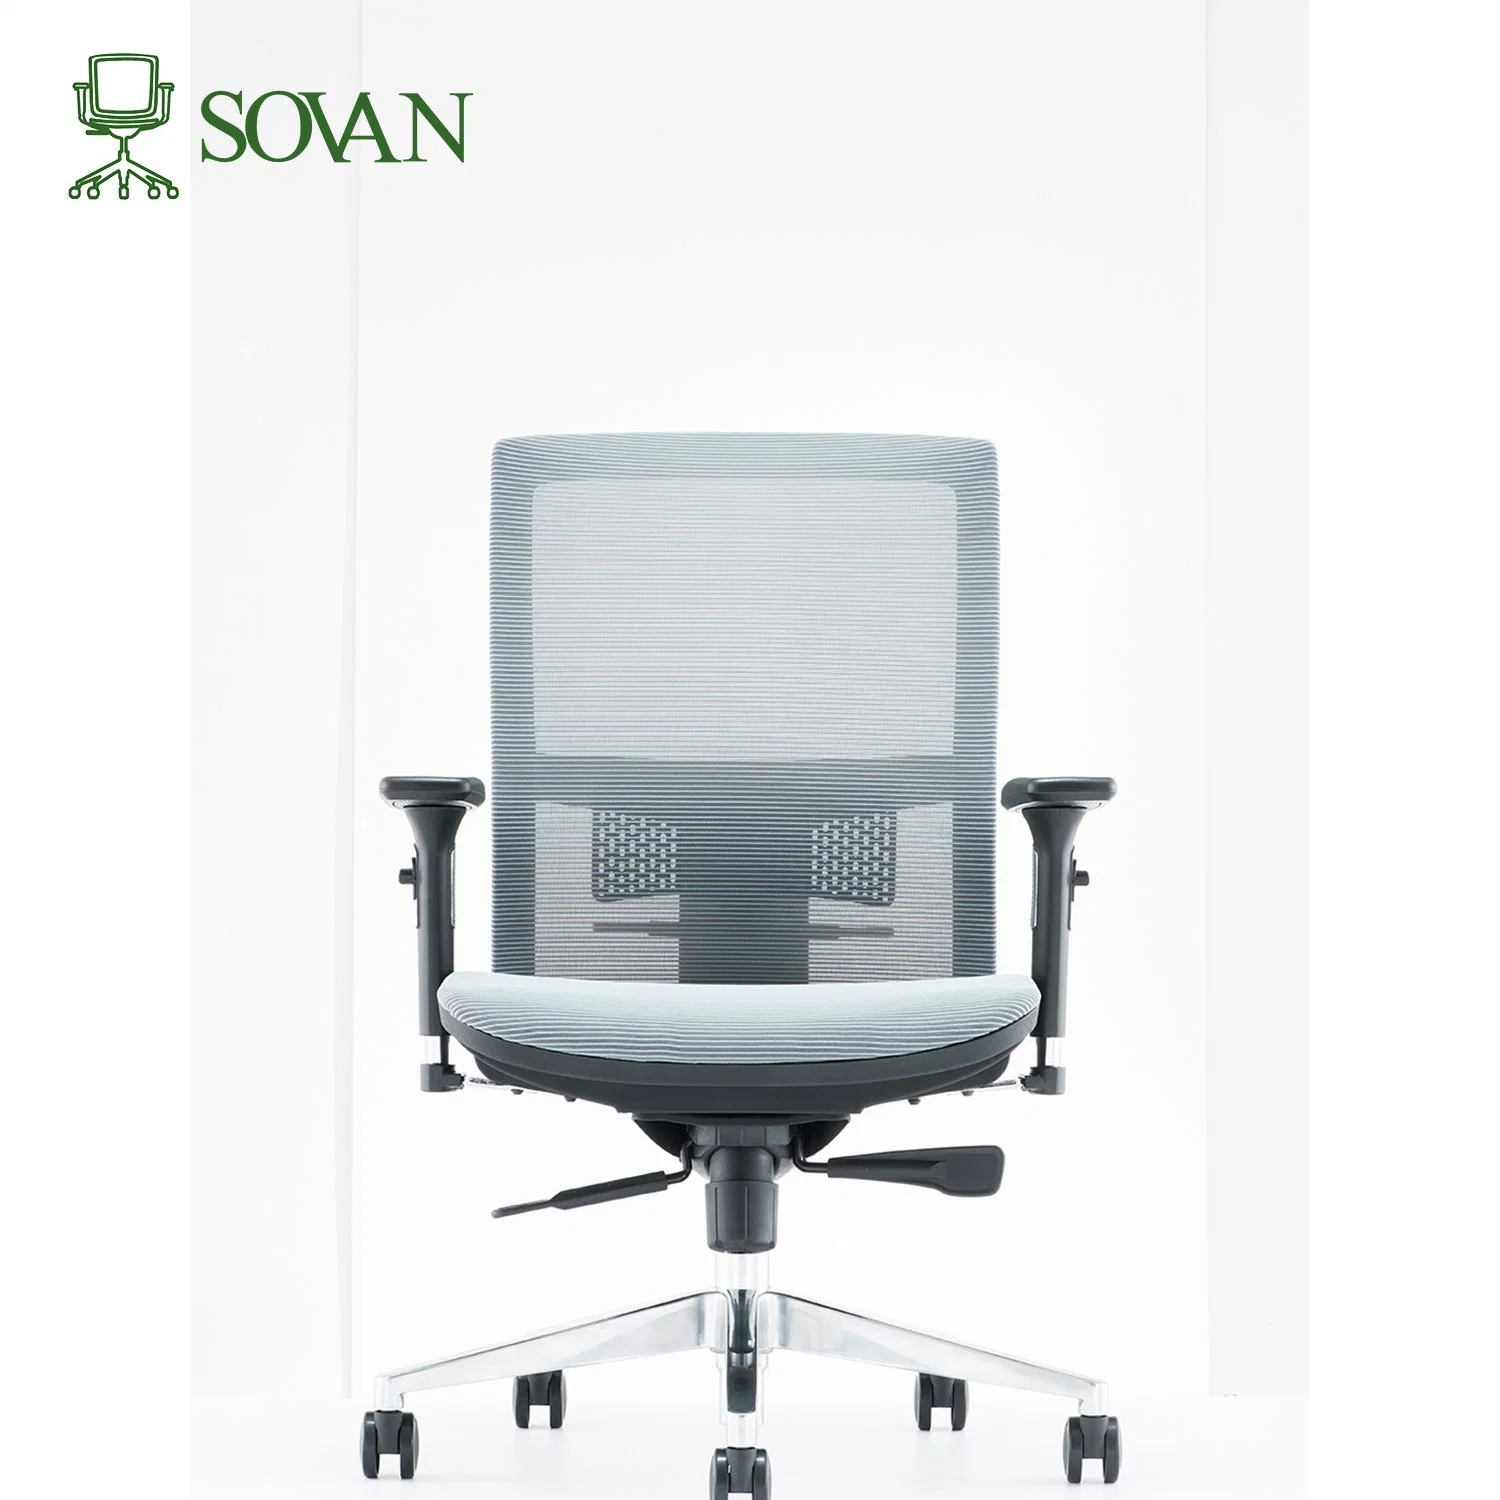 All Mesh Upholstery Seat Office Chair Furniture New Tech Ergonomic Chair with Chromed Gas Lift Class 3